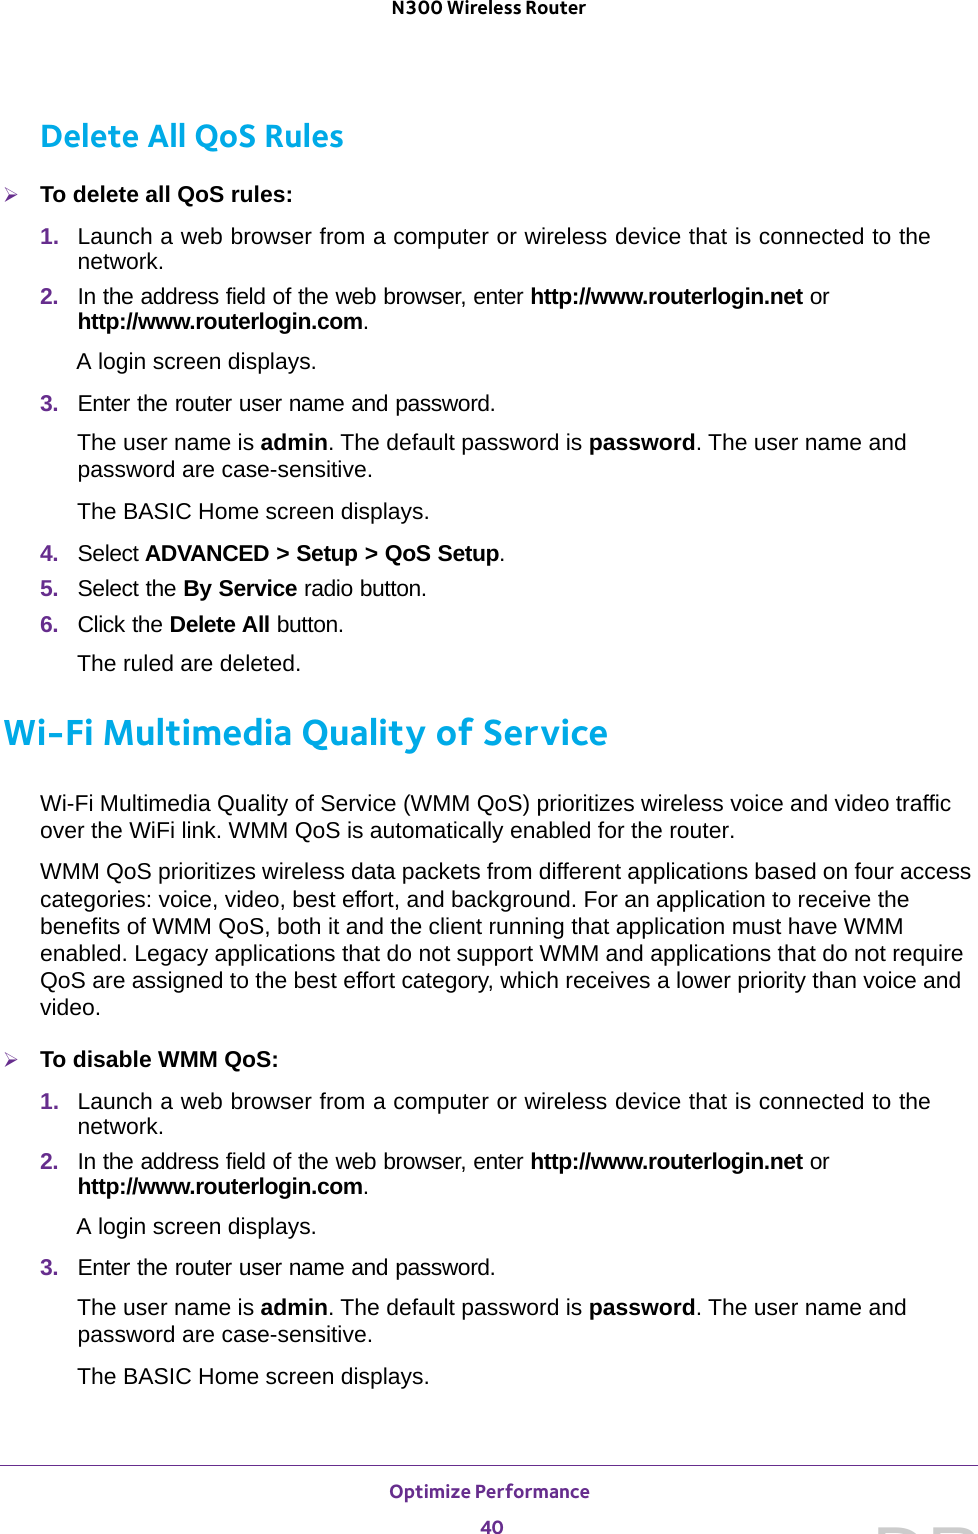 Optimize Performance 40N300 Wireless Router Delete All QoS RulesTo delete all QoS rules:1.  Launch a web browser from a computer or wireless device that is connected to the network.2.  In the address field of the web browser, enter http://www.routerlogin.net or http://www.routerlogin.com.A login screen displays.3.  Enter the router user name and password.The user name is admin. The default password is password. The user name and password are case-sensitive.The BASIC Home screen displays.4.  Select ADVANCED &gt; Setup &gt; QoS Setup.5.  Select the By Service radio button.6.  Click the Delete All button.The ruled are deleted.Wi-Fi Multimedia Quality of ServiceWi-Fi Multimedia Quality of Service (WMM QoS) prioritizes wireless voice and video traffic over the WiFi link. WMM QoS is automatically enabled for the router.WMM QoS prioritizes wireless data packets from different applications based on four access categories: voice, video, best effort, and background. For an application to receive the benefits of WMM QoS, both it and the client running that application must have WMM enabled. Legacy applications that do not support WMM and applications that do not require QoS are assigned to the best effort category, which receives a lower priority than voice and video.To disable WMM QoS: 1.  Launch a web browser from a computer or wireless device that is connected to the network.2.  In the address field of the web browser, enter http://www.routerlogin.net or http://www.routerlogin.com.A login screen displays.3.  Enter the router user name and password.The user name is admin. The default password is password. The user name and password are case-sensitive.The BASIC Home screen displays.DRAFT